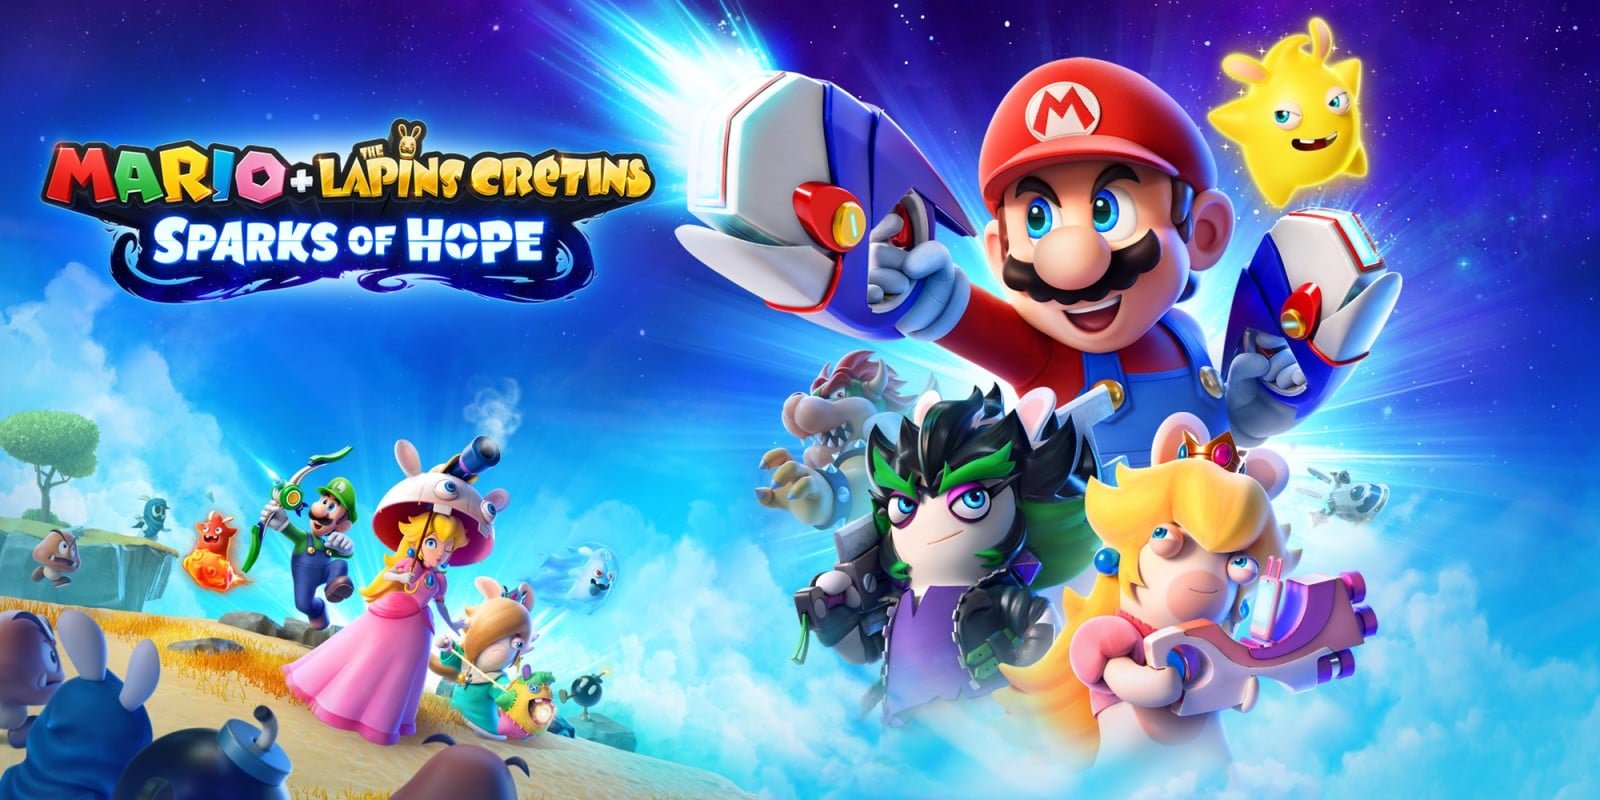 Mario The Lapins Crétins Sparks of Hope